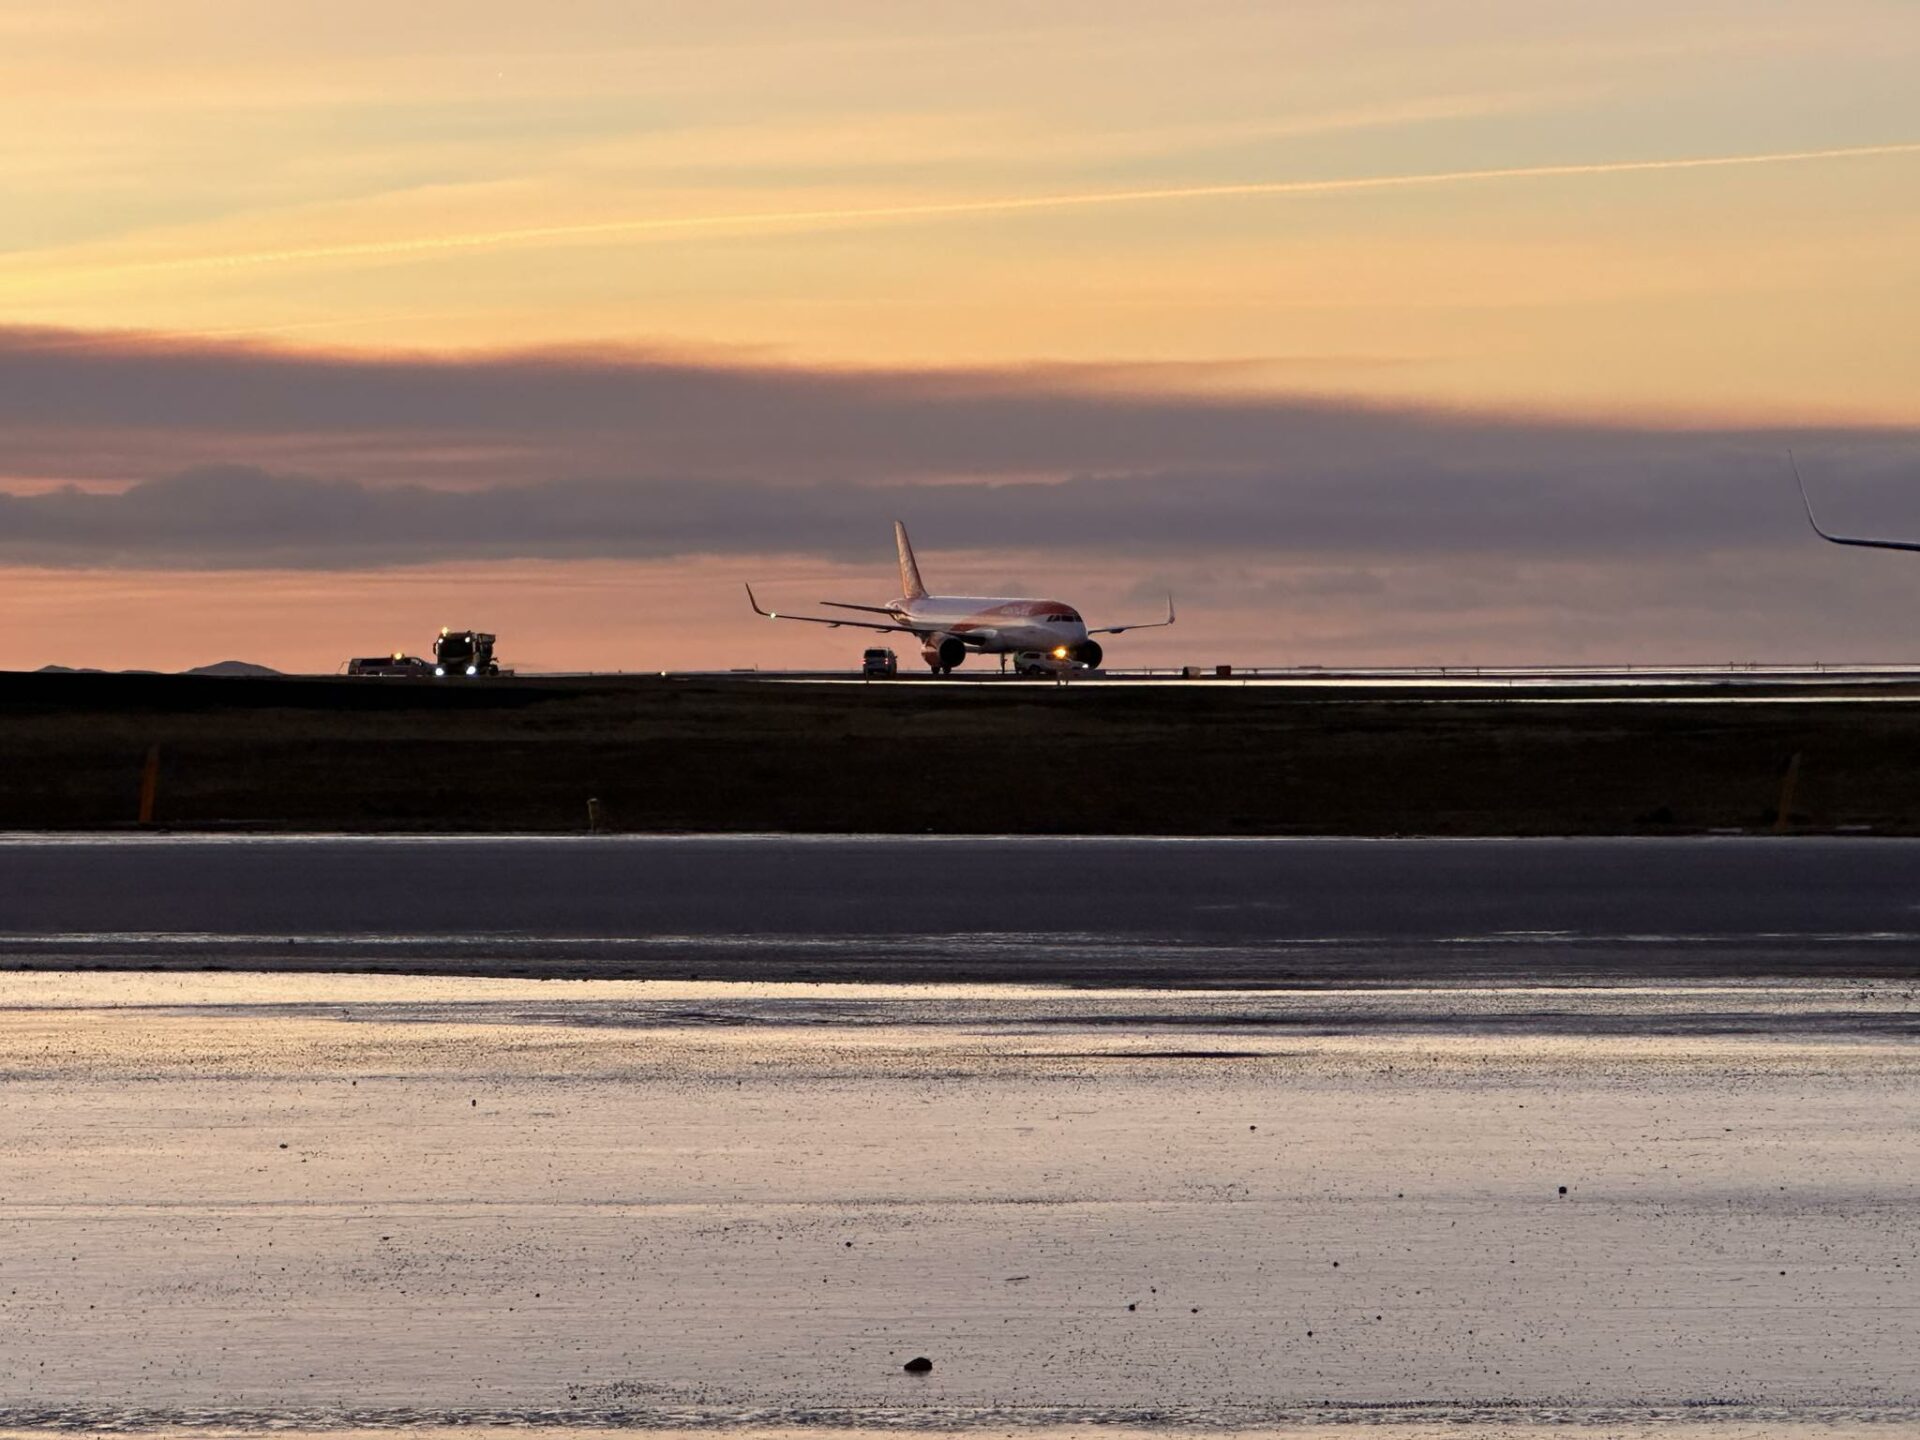 easyJet A320neo performing flight EZY12BV (U28843) rolled out taxiway in Keflavik // Source: Jahnusz